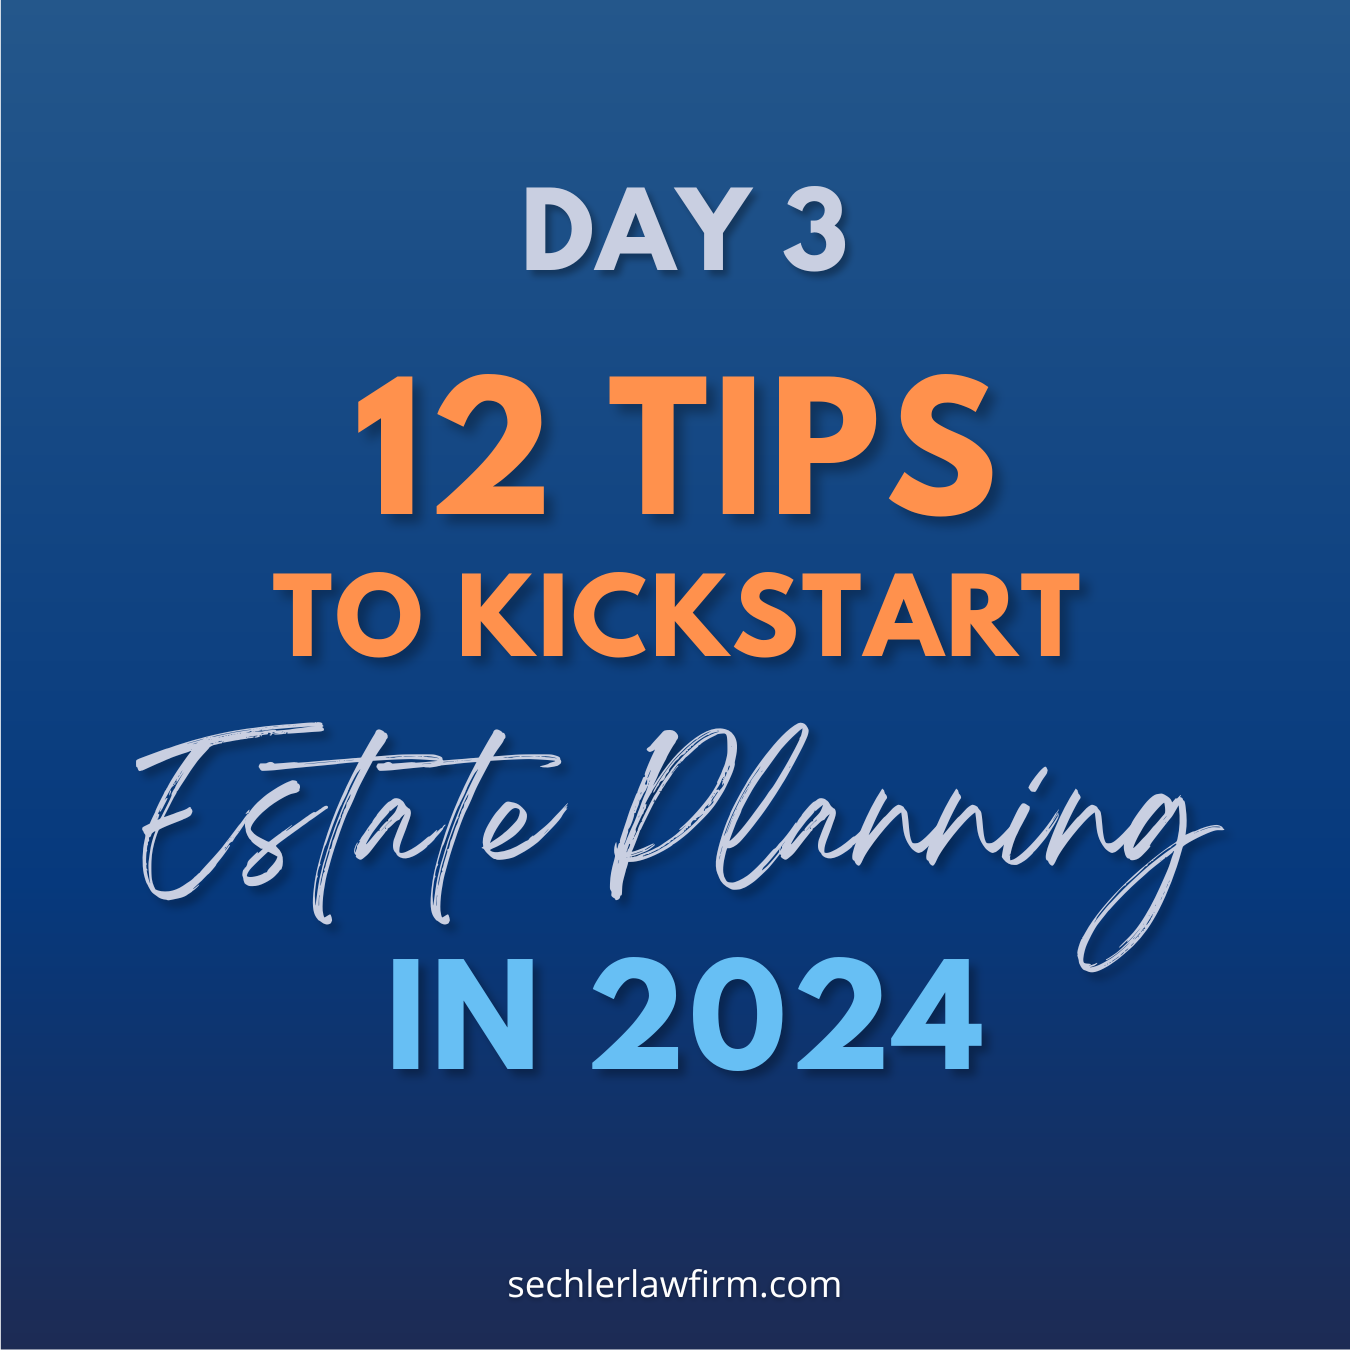 12 Tips to Kickstart your Estate Planning for 2024 – Day 3